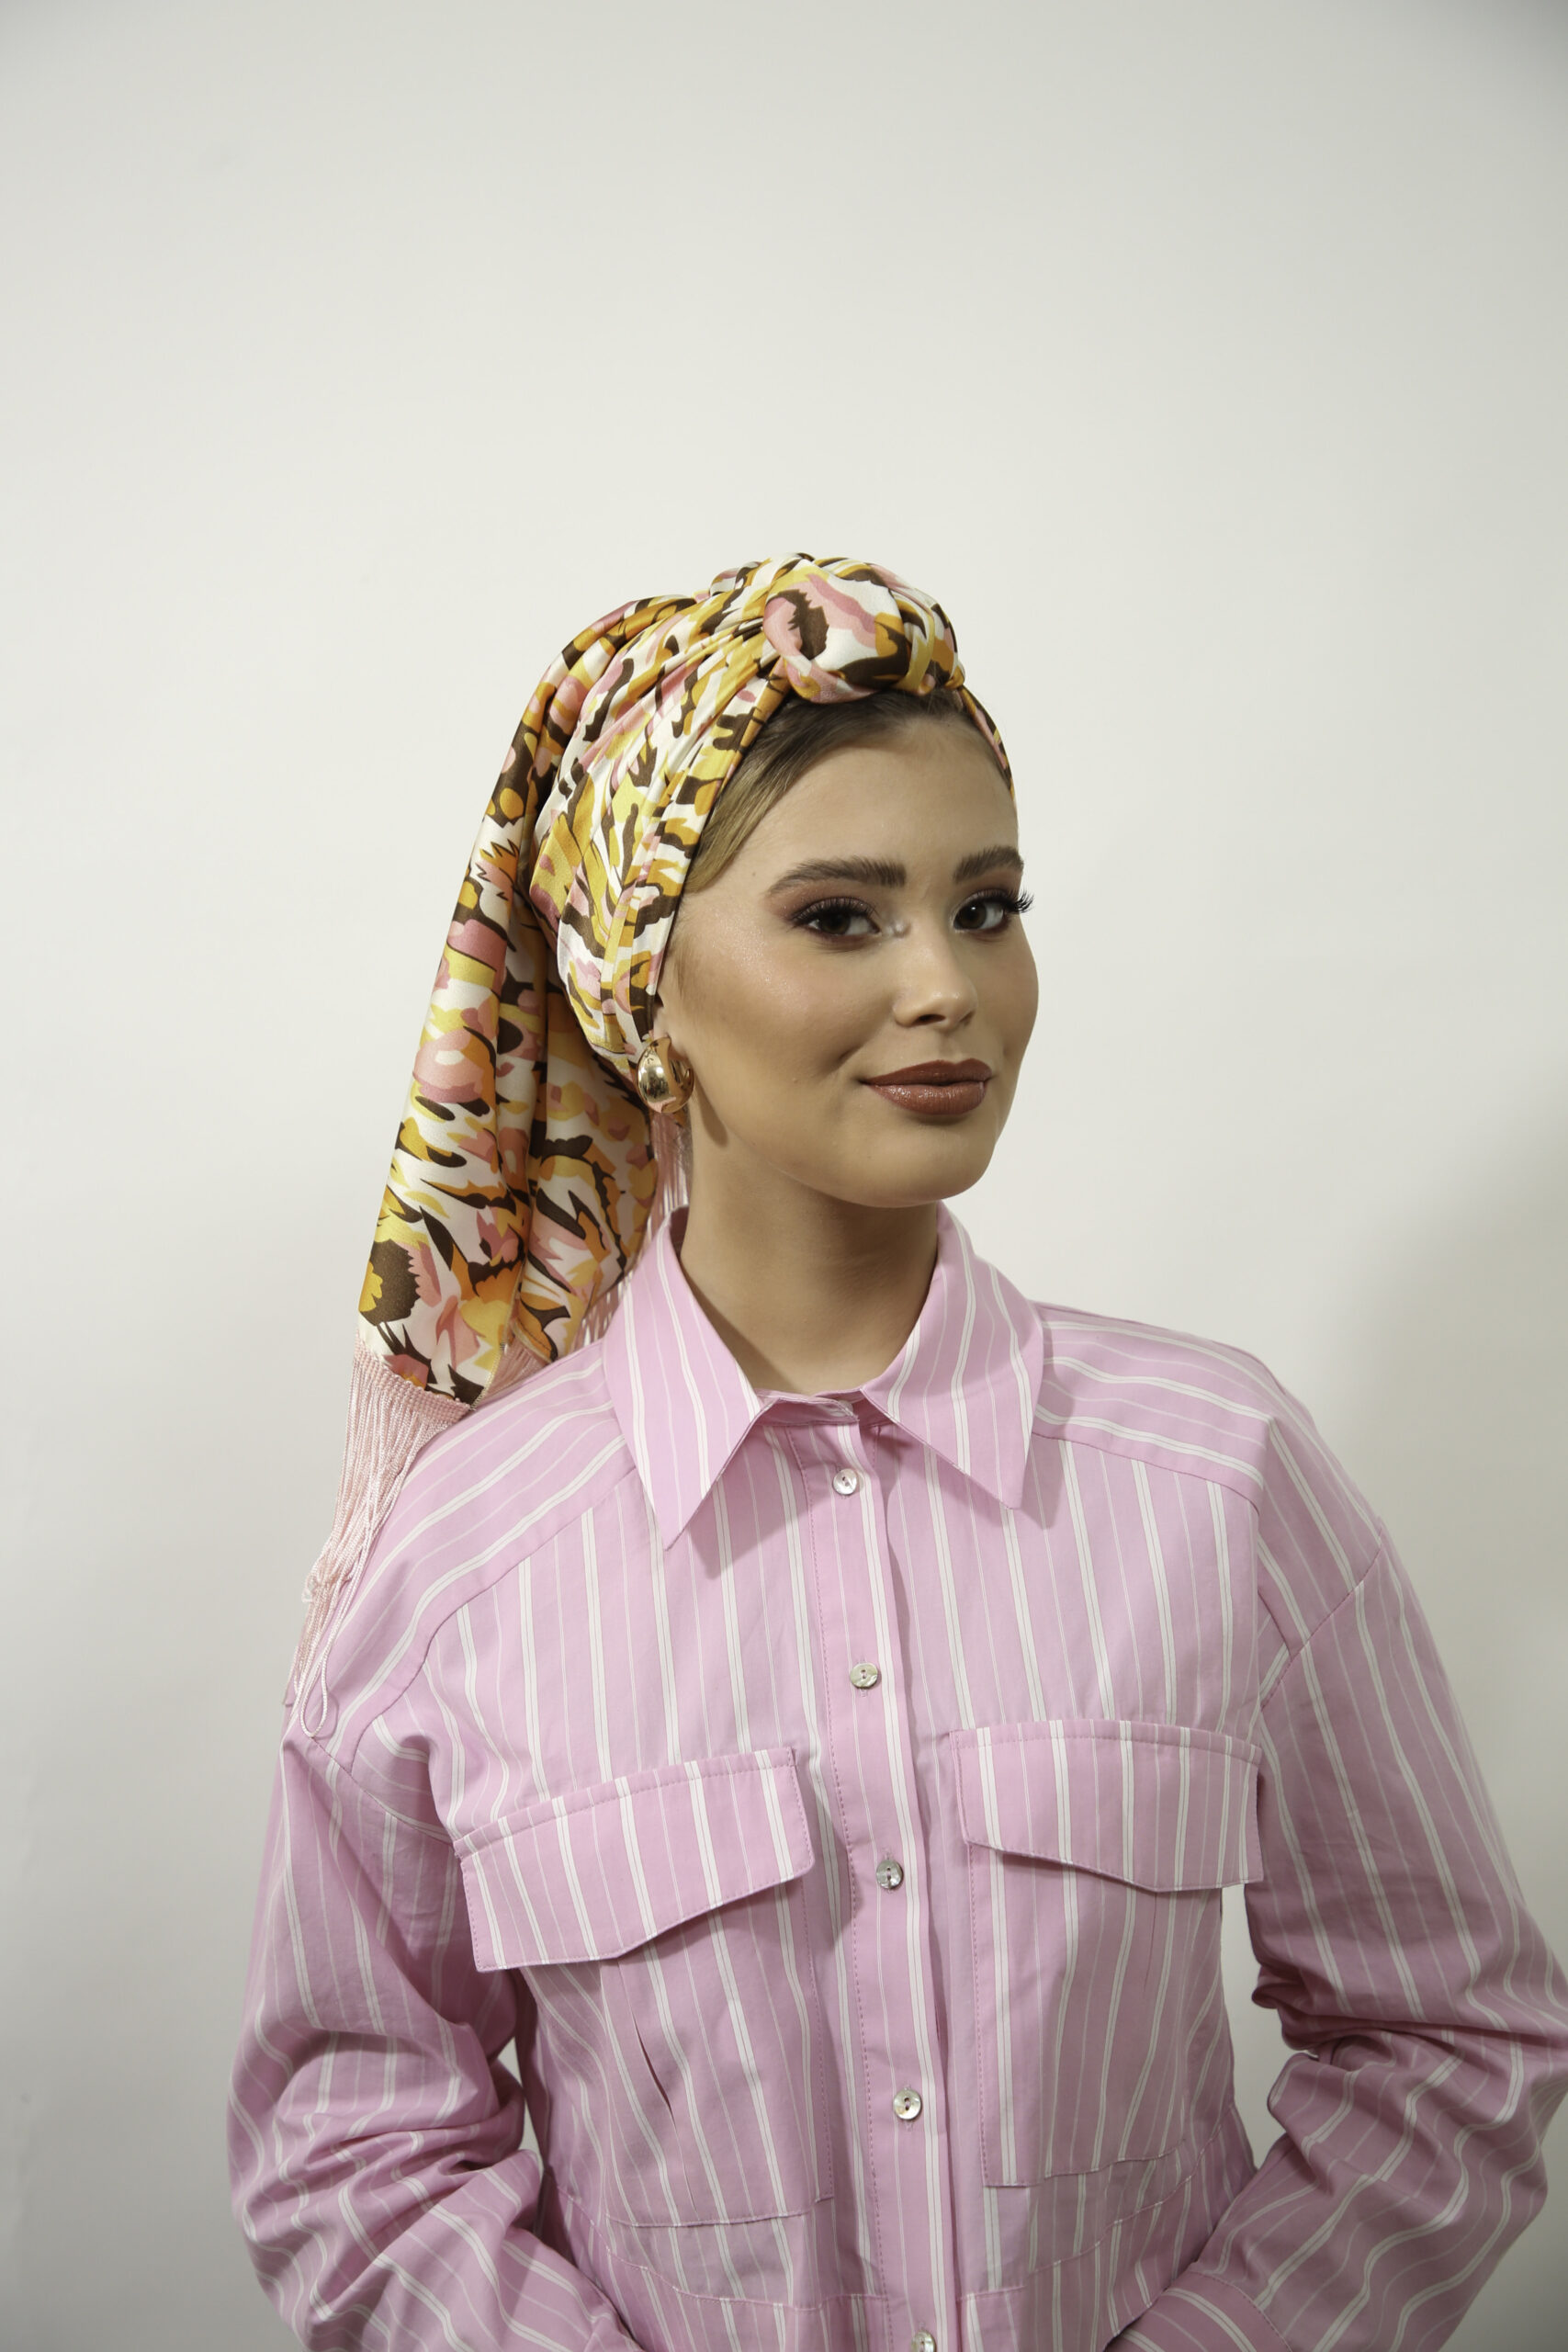 Printed spring Headscarf with or without fringes